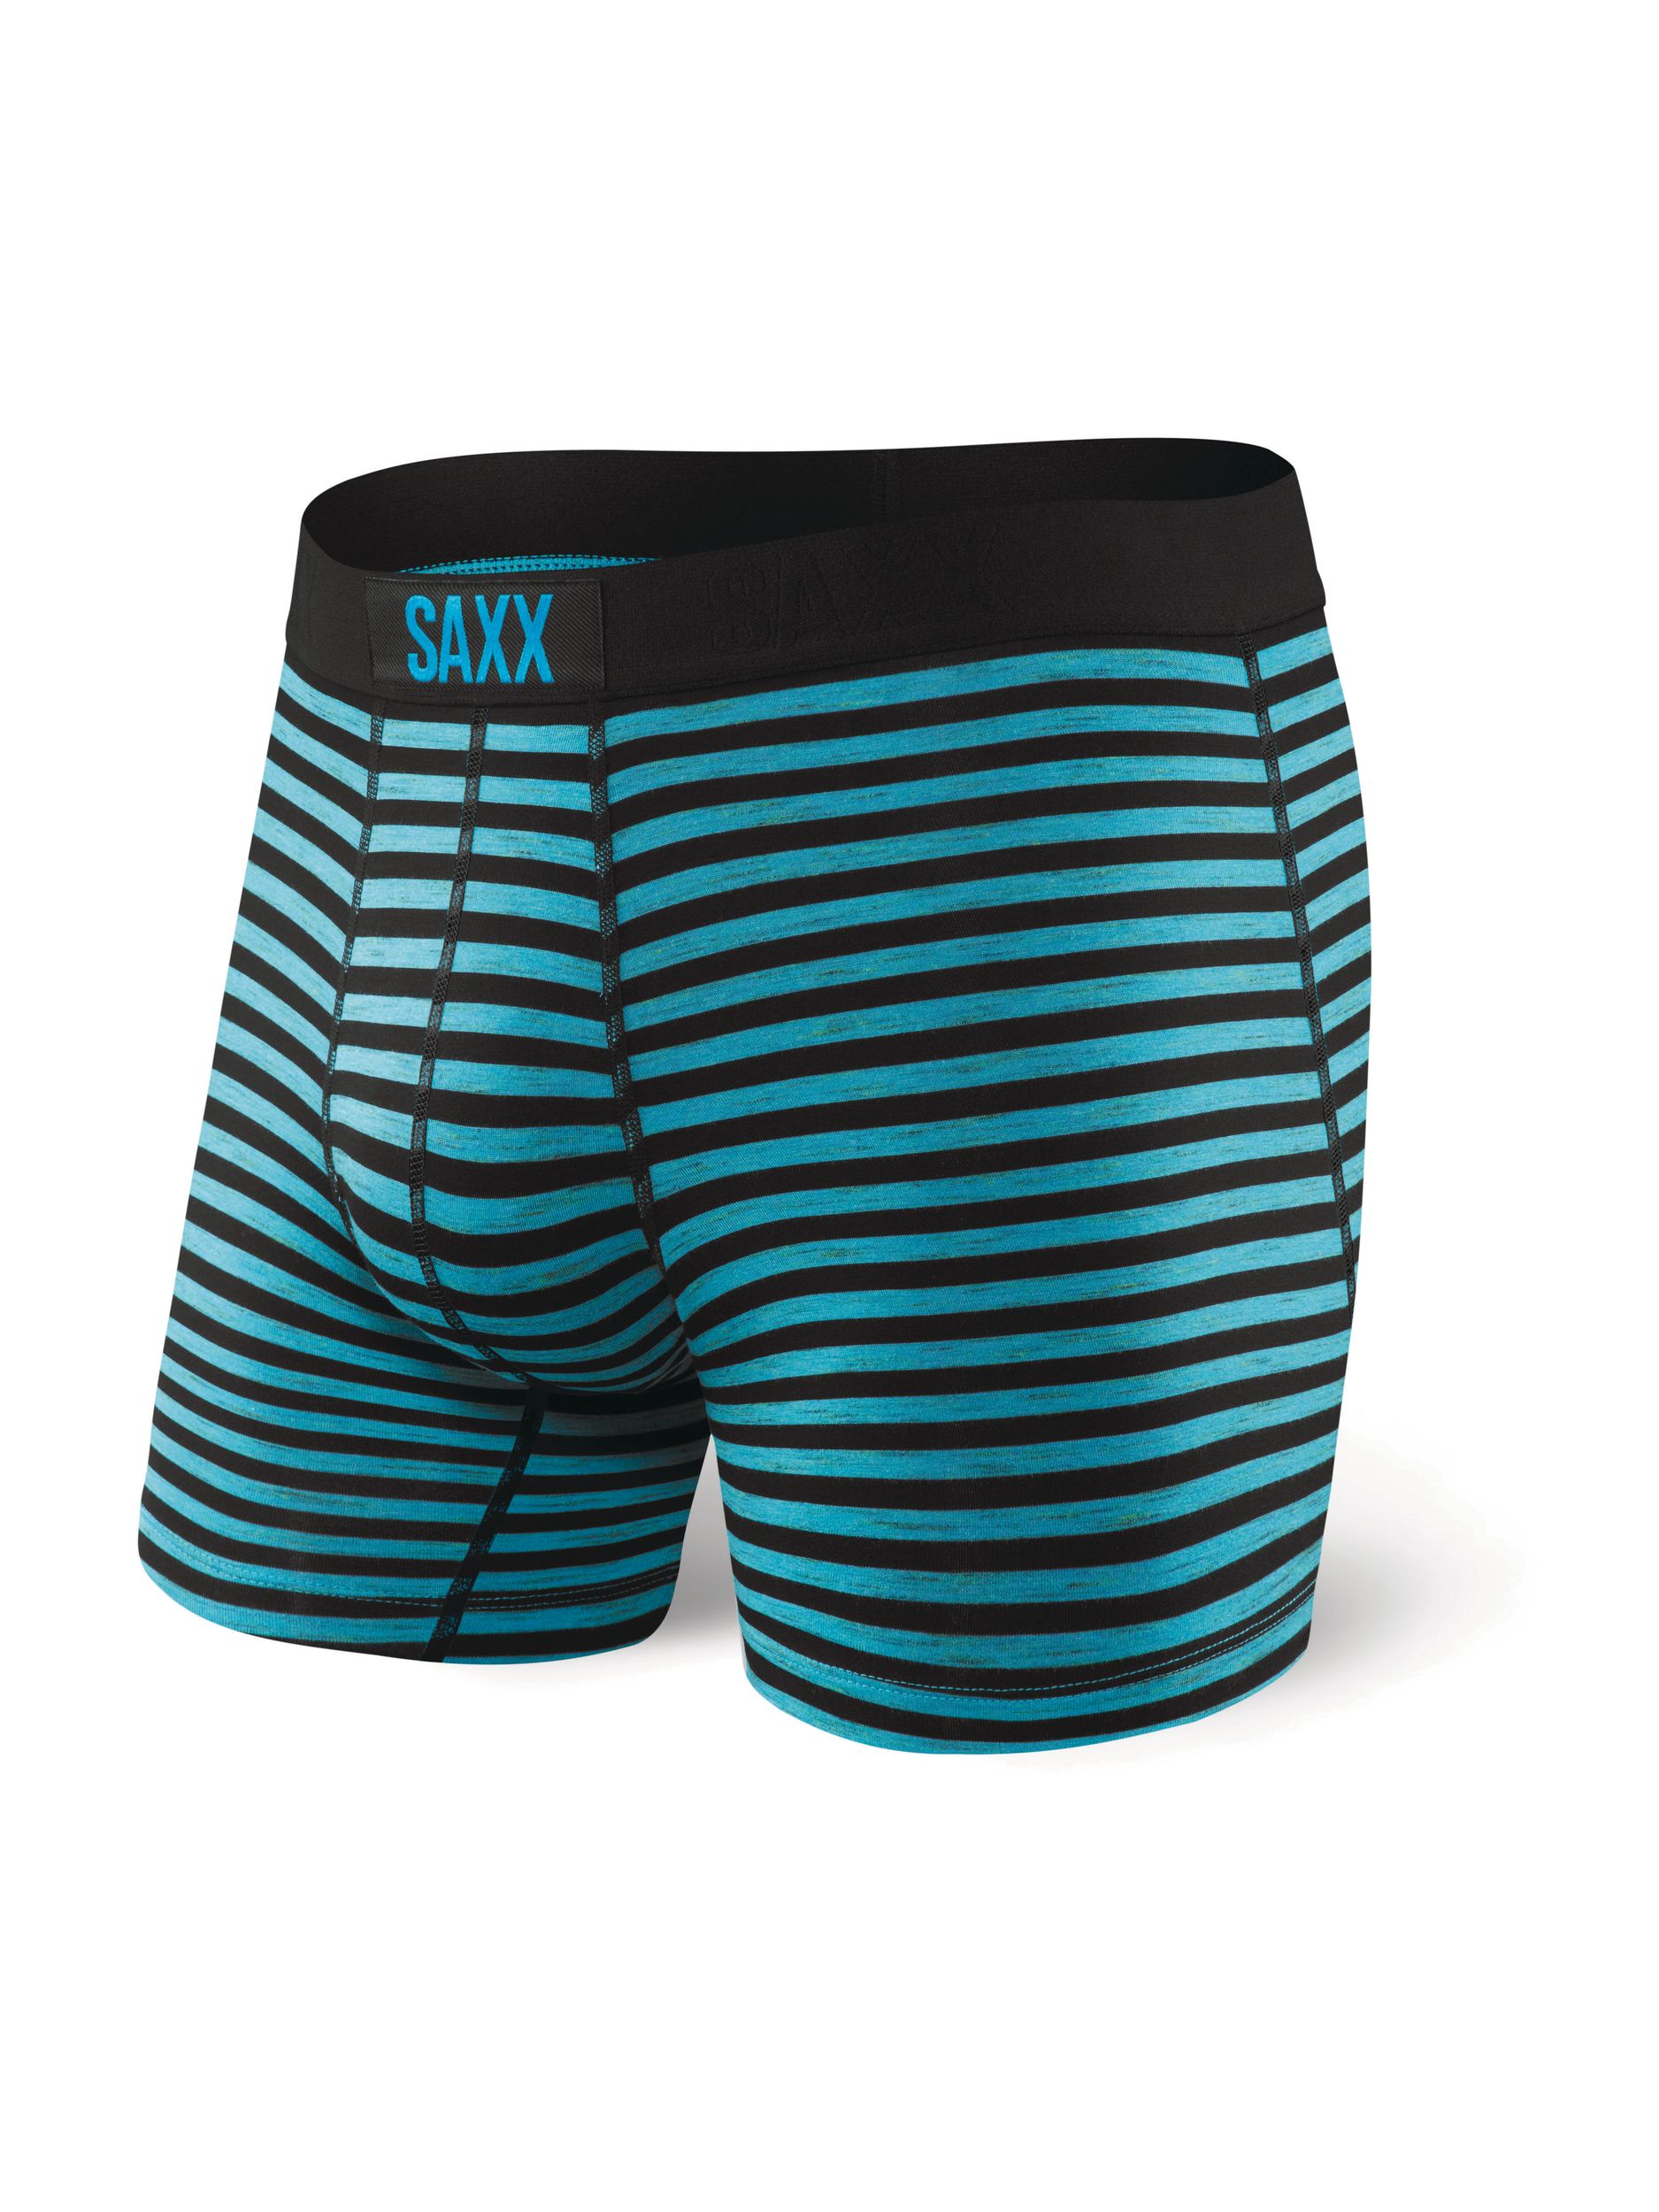 SAXX Vibe S Boxer Brief Blue SLIM FIT, Ballpark Pouch, No Fly, Moisture  Wicking